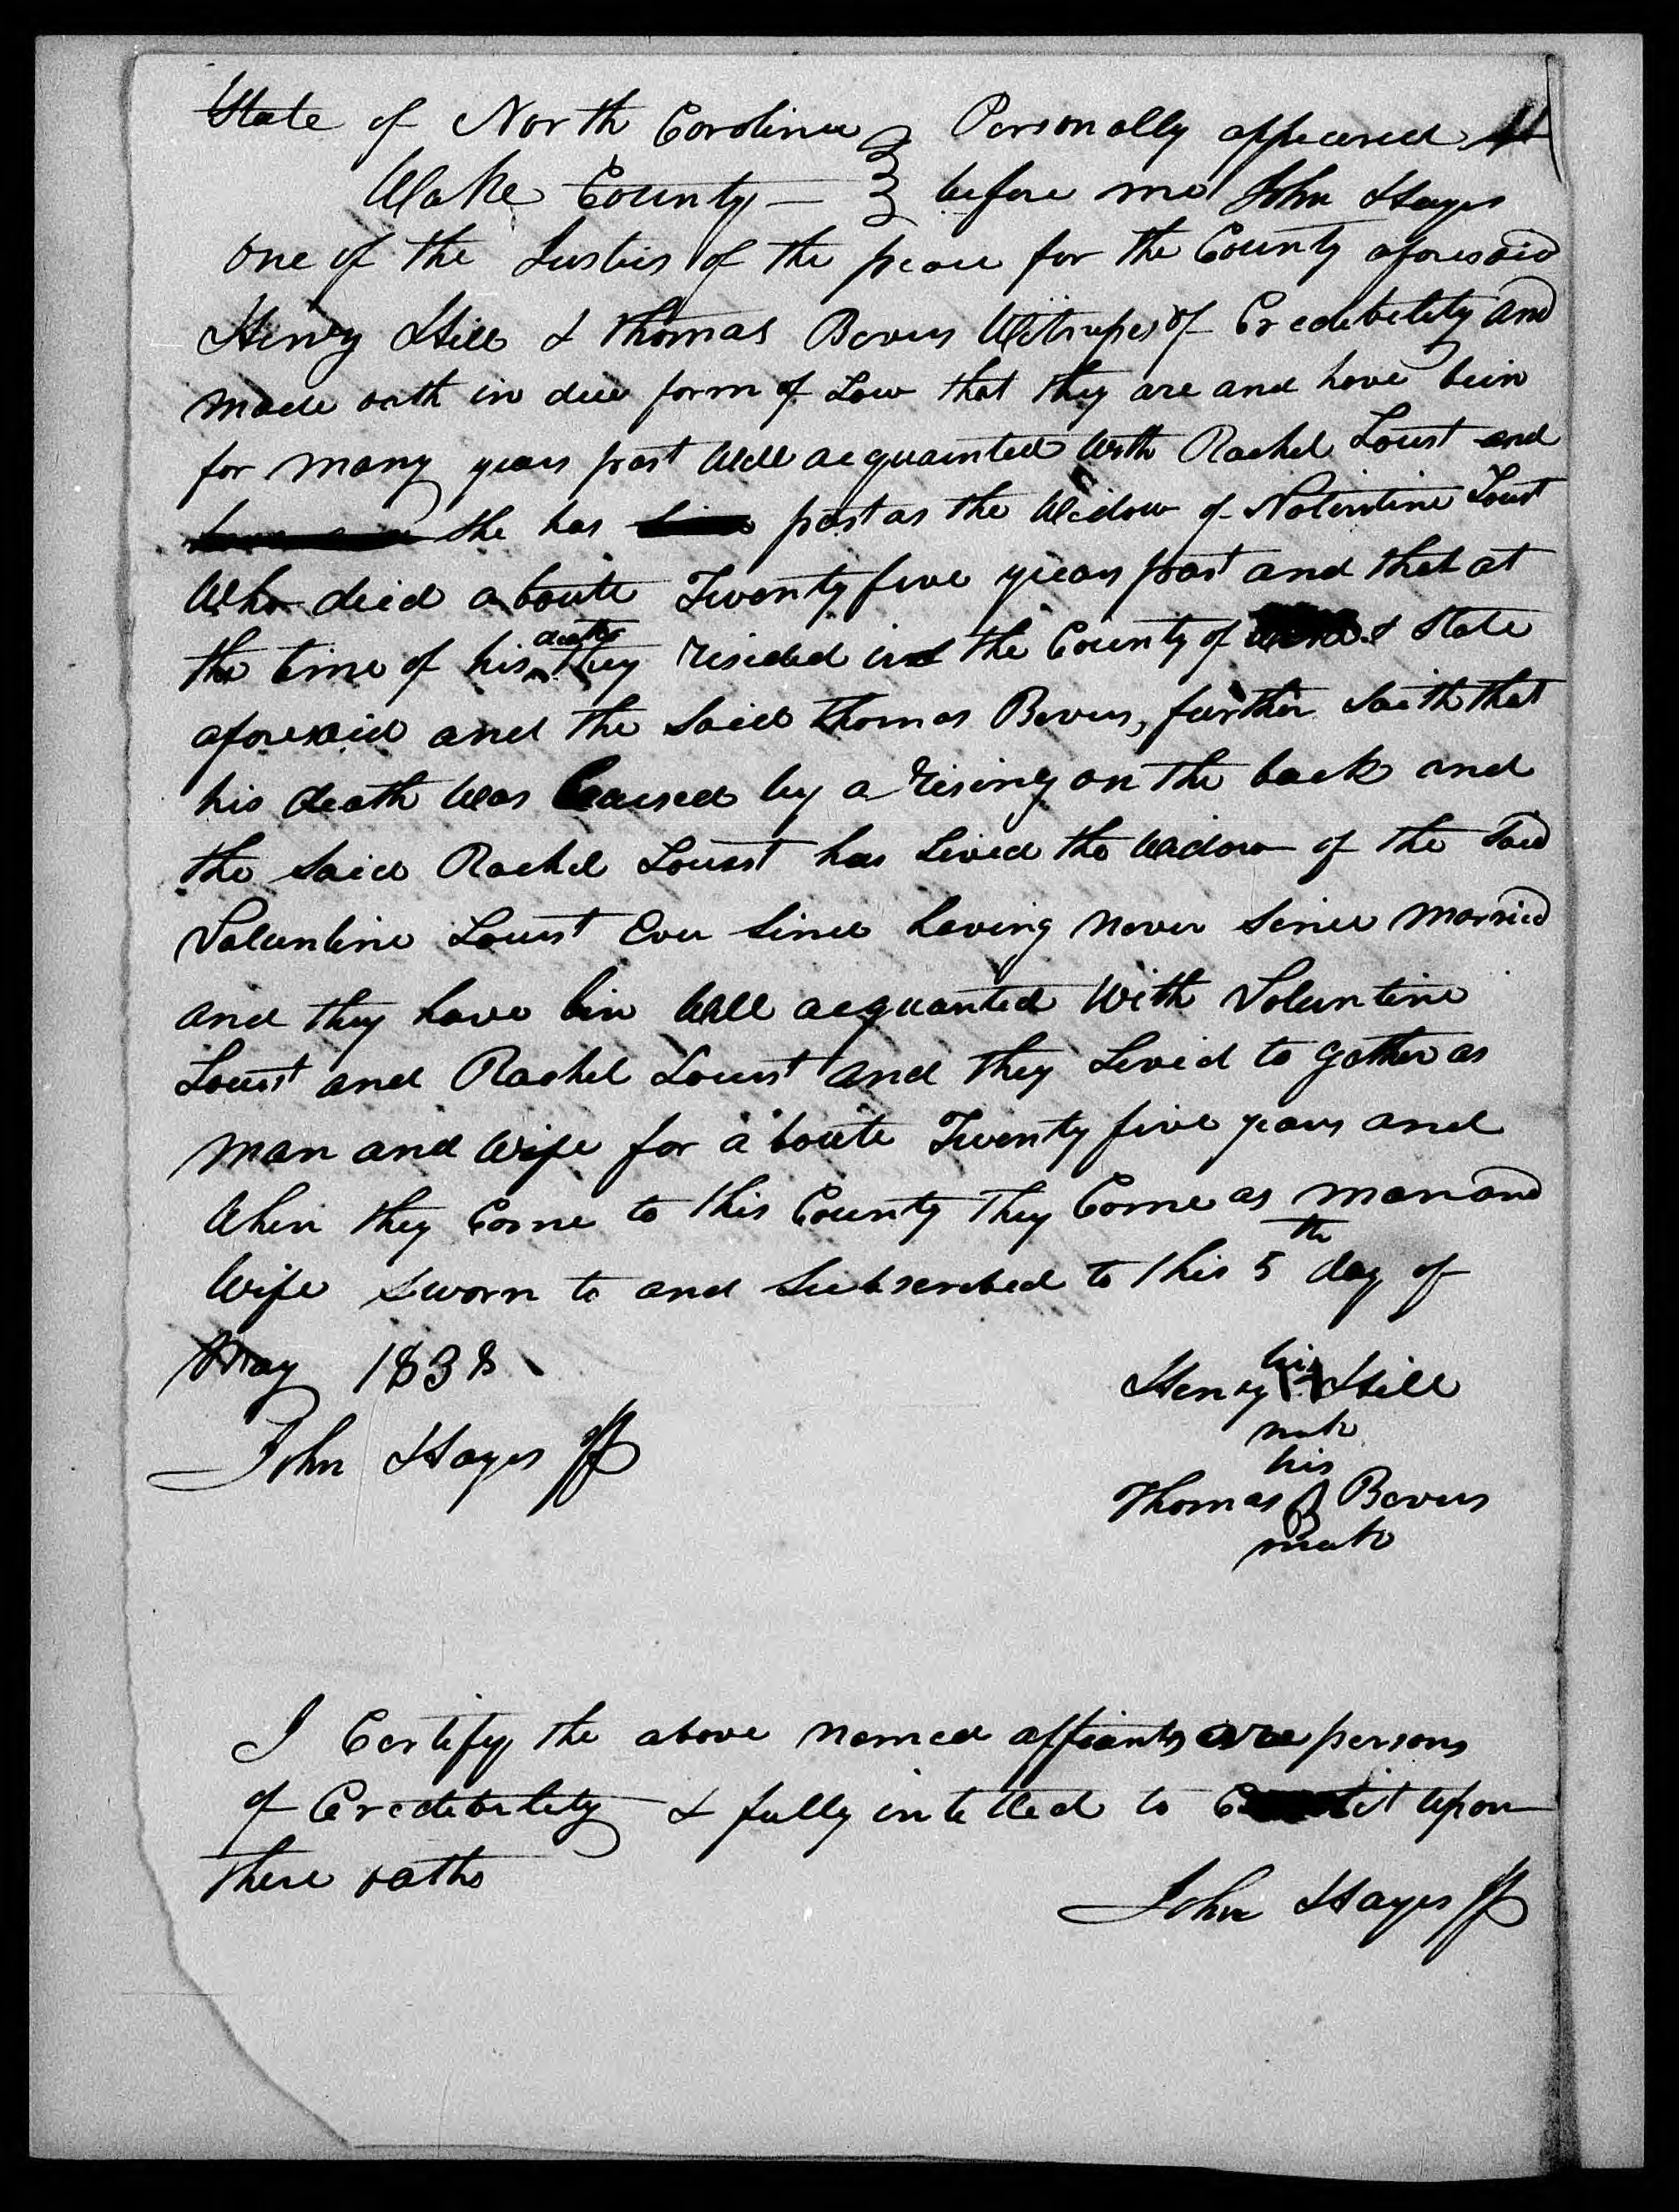 Affidavit of Henry Hill and Thomas Bevers in support of a Pension Claim for Rachel Locus, 5 May 1838, page 1